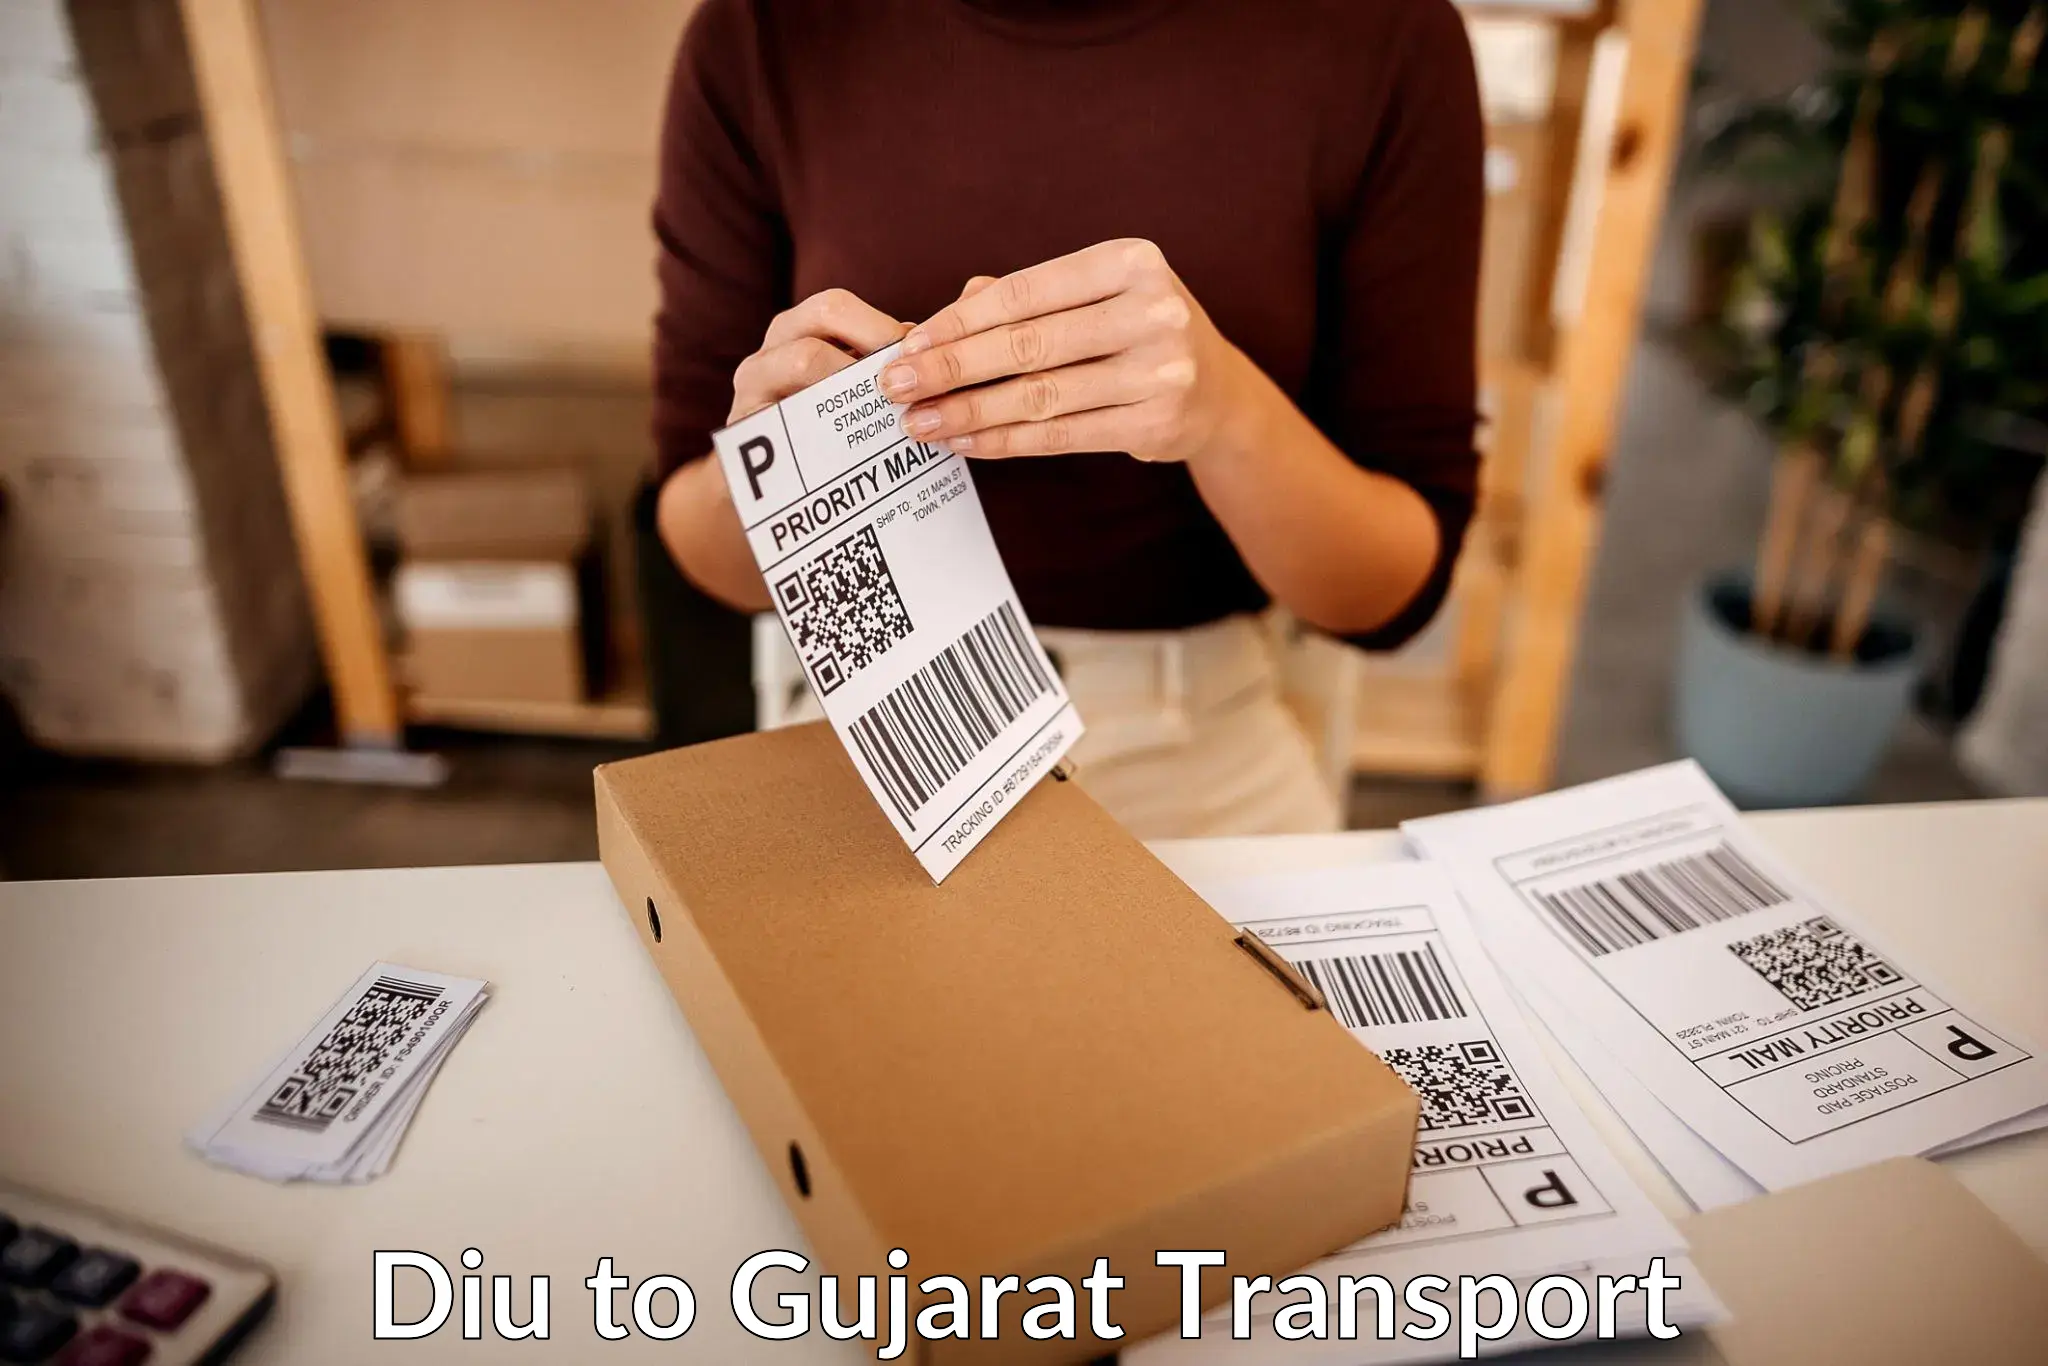 Parcel transport services Diu to Bharuch